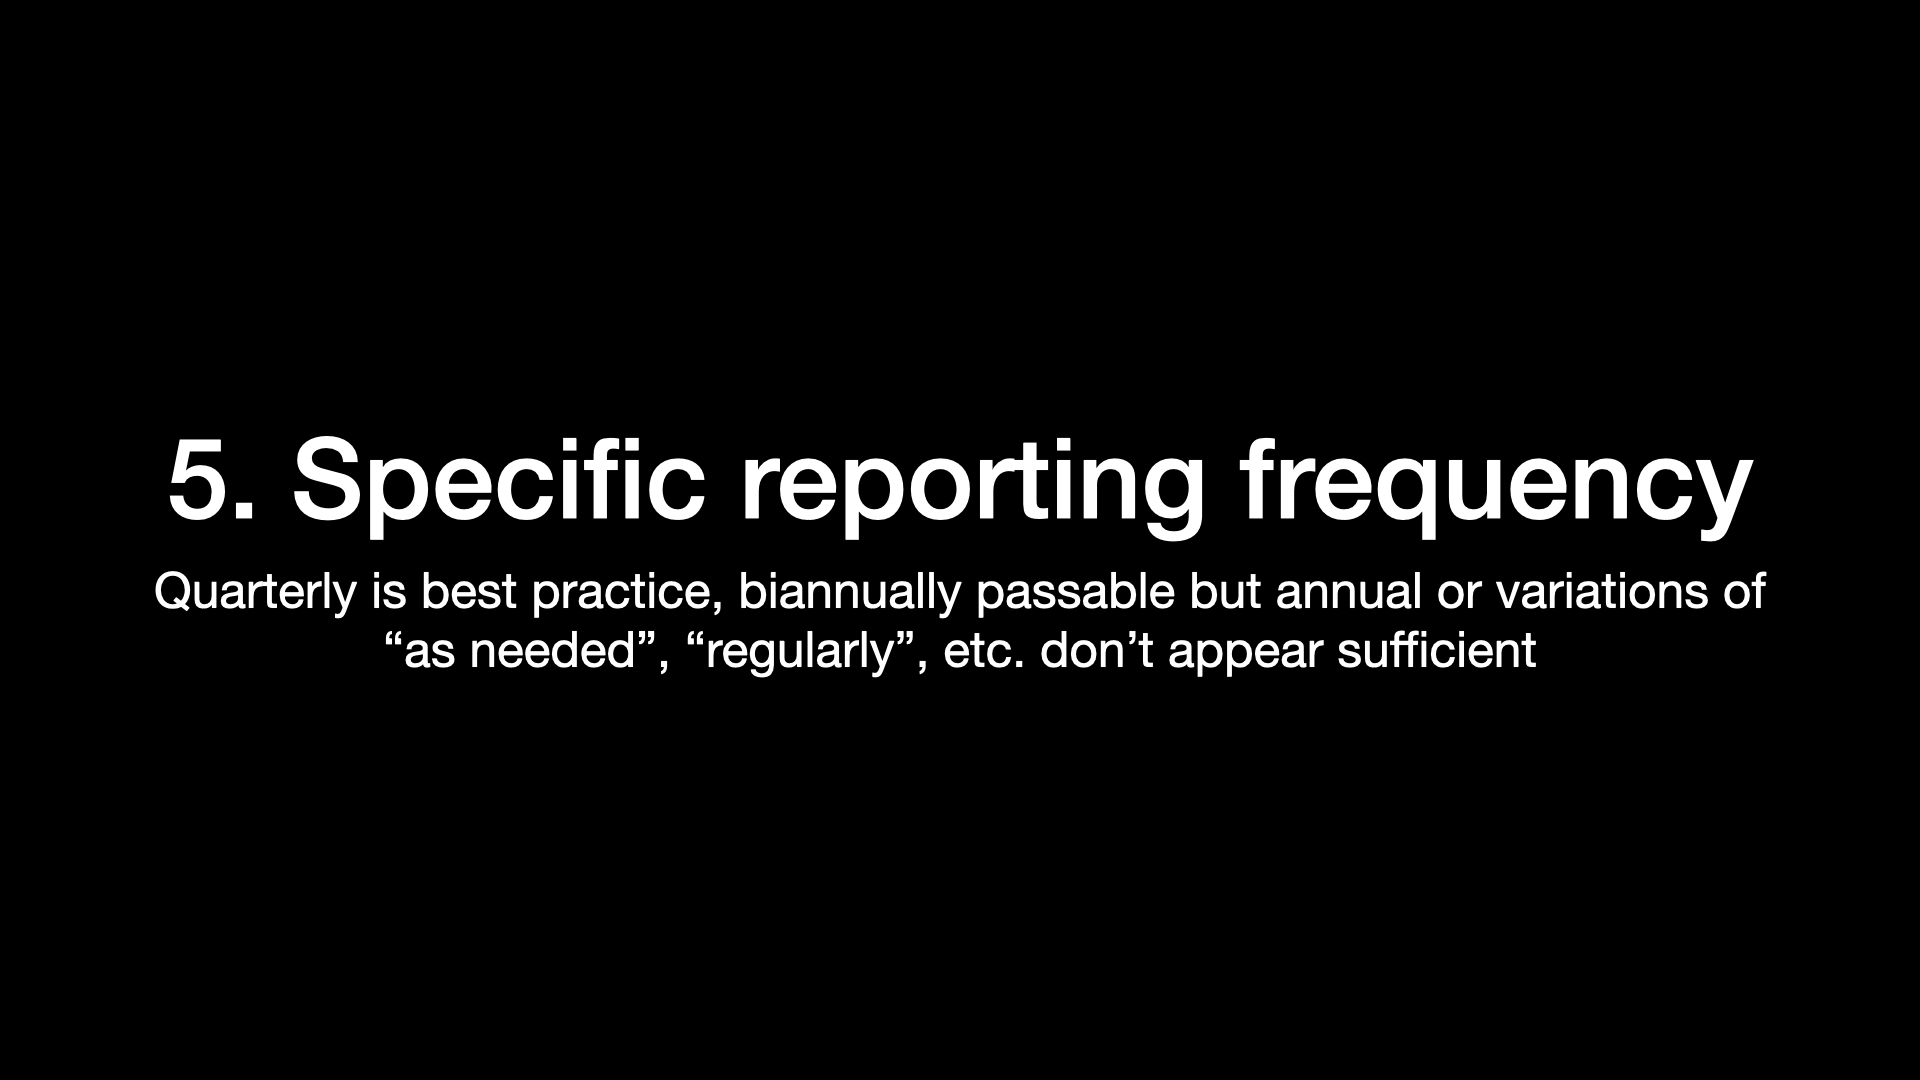 5. Specific reporting frequency Quarterly is best practice, biannually passable but annual or variations of “as needed”, “regularly”, etc. don’t appear sufficient 